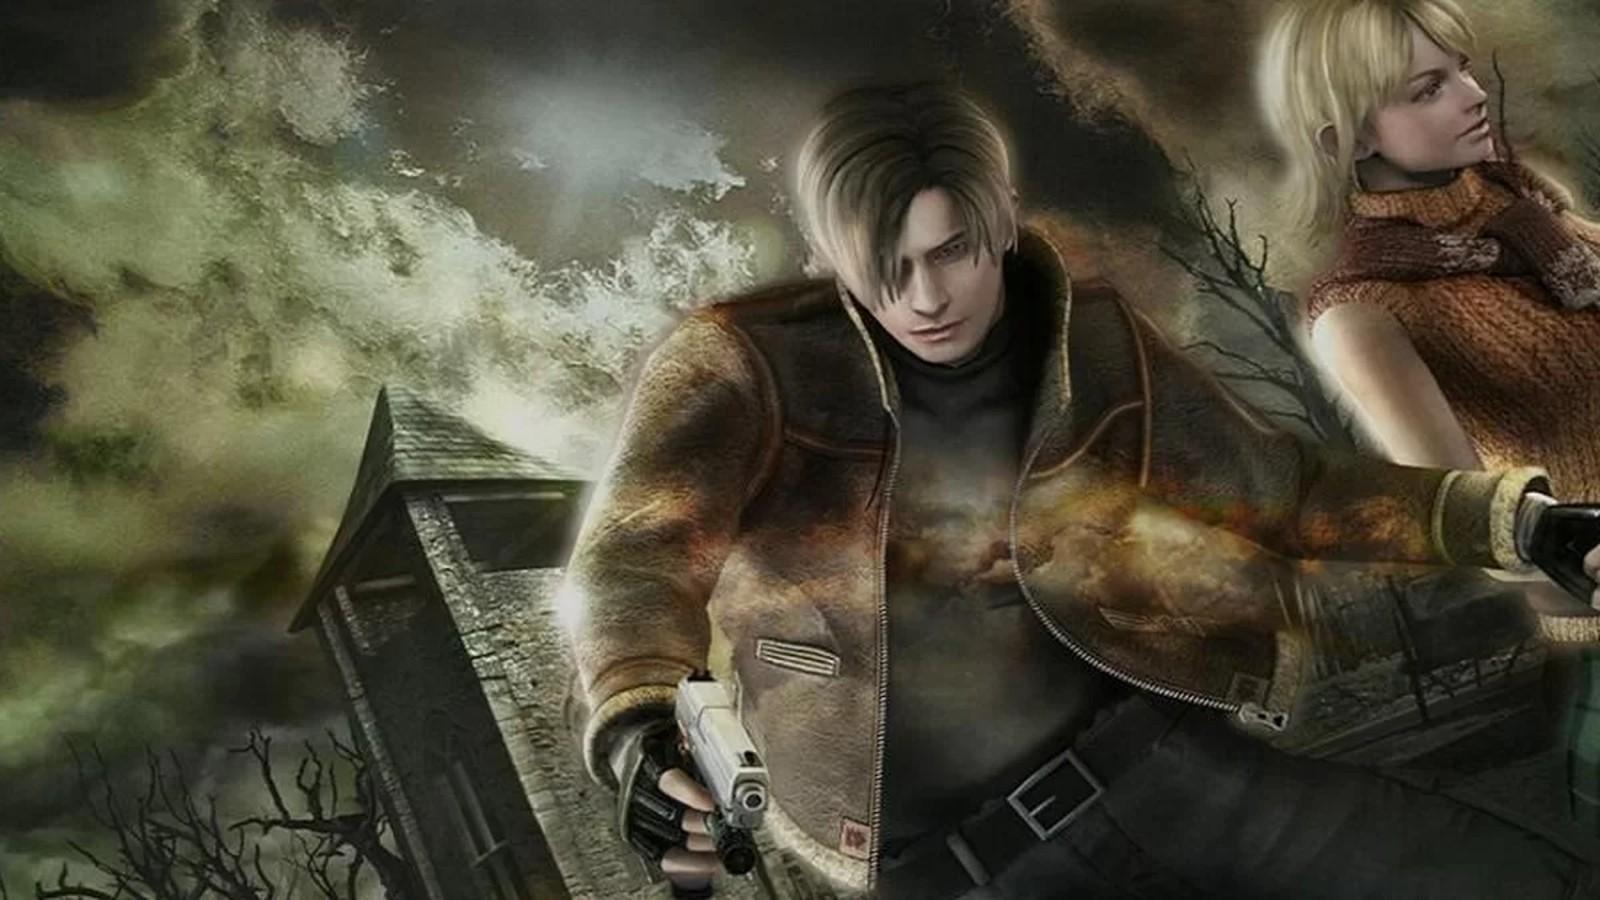 An official image of Resident Evil 4 artwork, featuring Leon and Ashley. One of the games to play like The Last of Us in 2023.